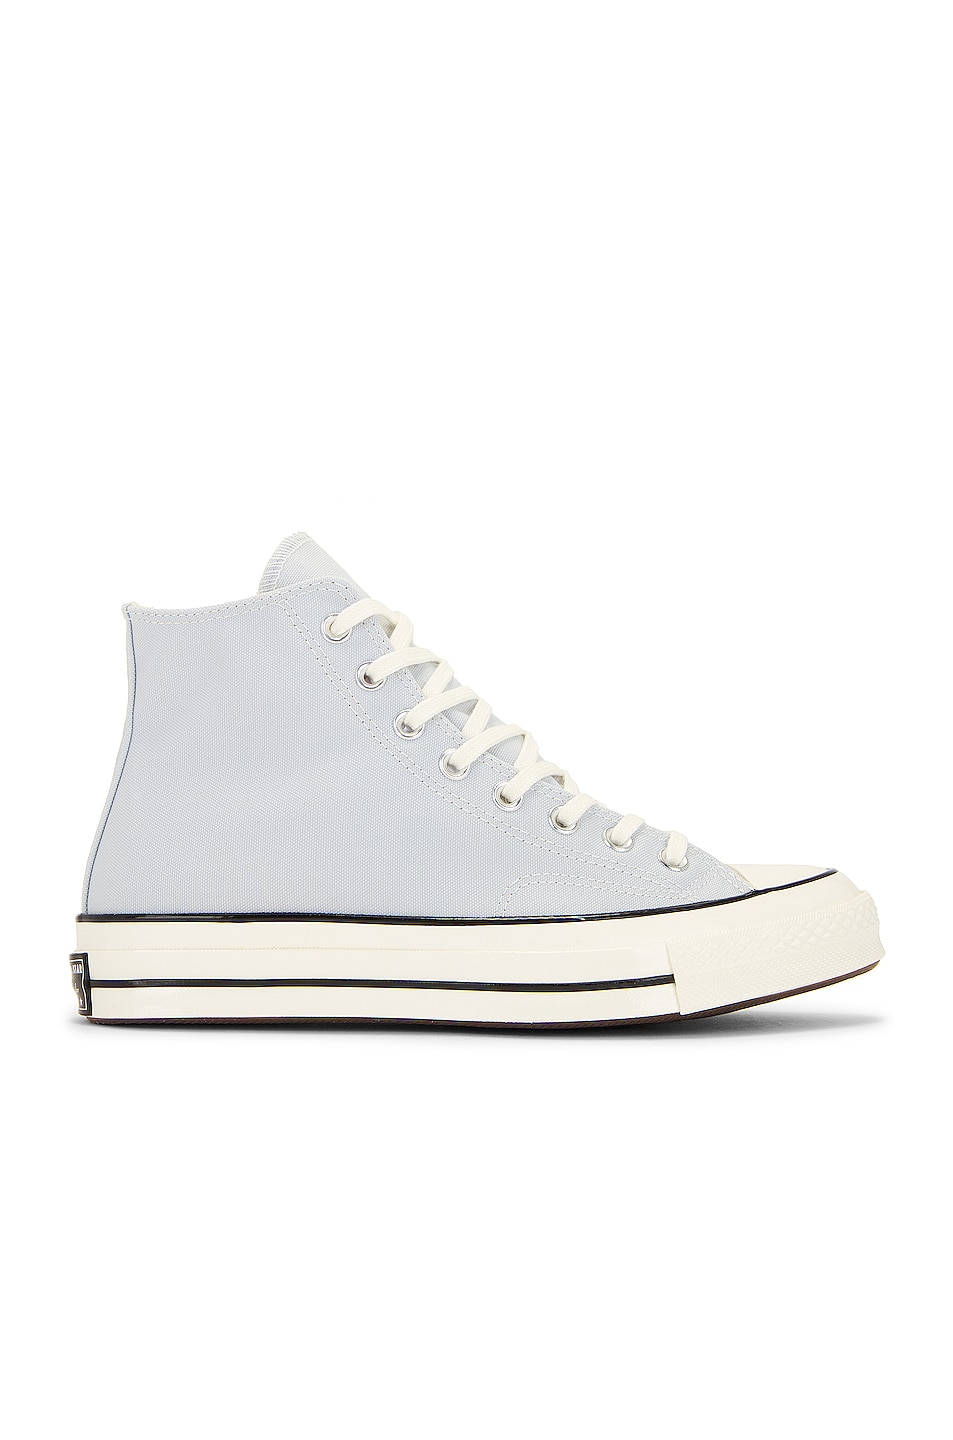 Image 1 of Converse Chuck 70 Hi in Ghosted, Egret, & Black